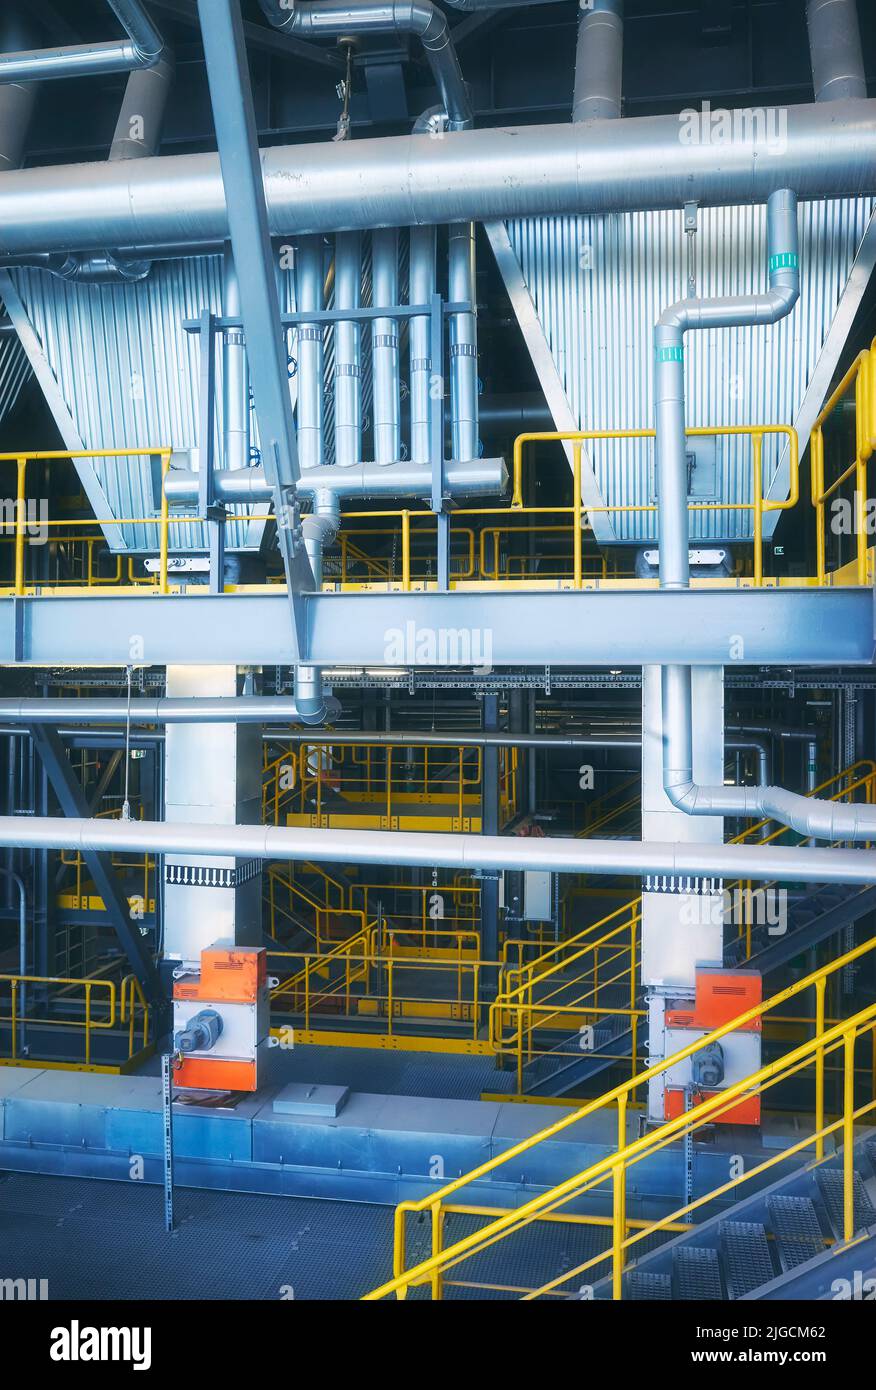 Interior of the waste incineration plant, industrial infrastructure concept, color toning applied. Stock Photo